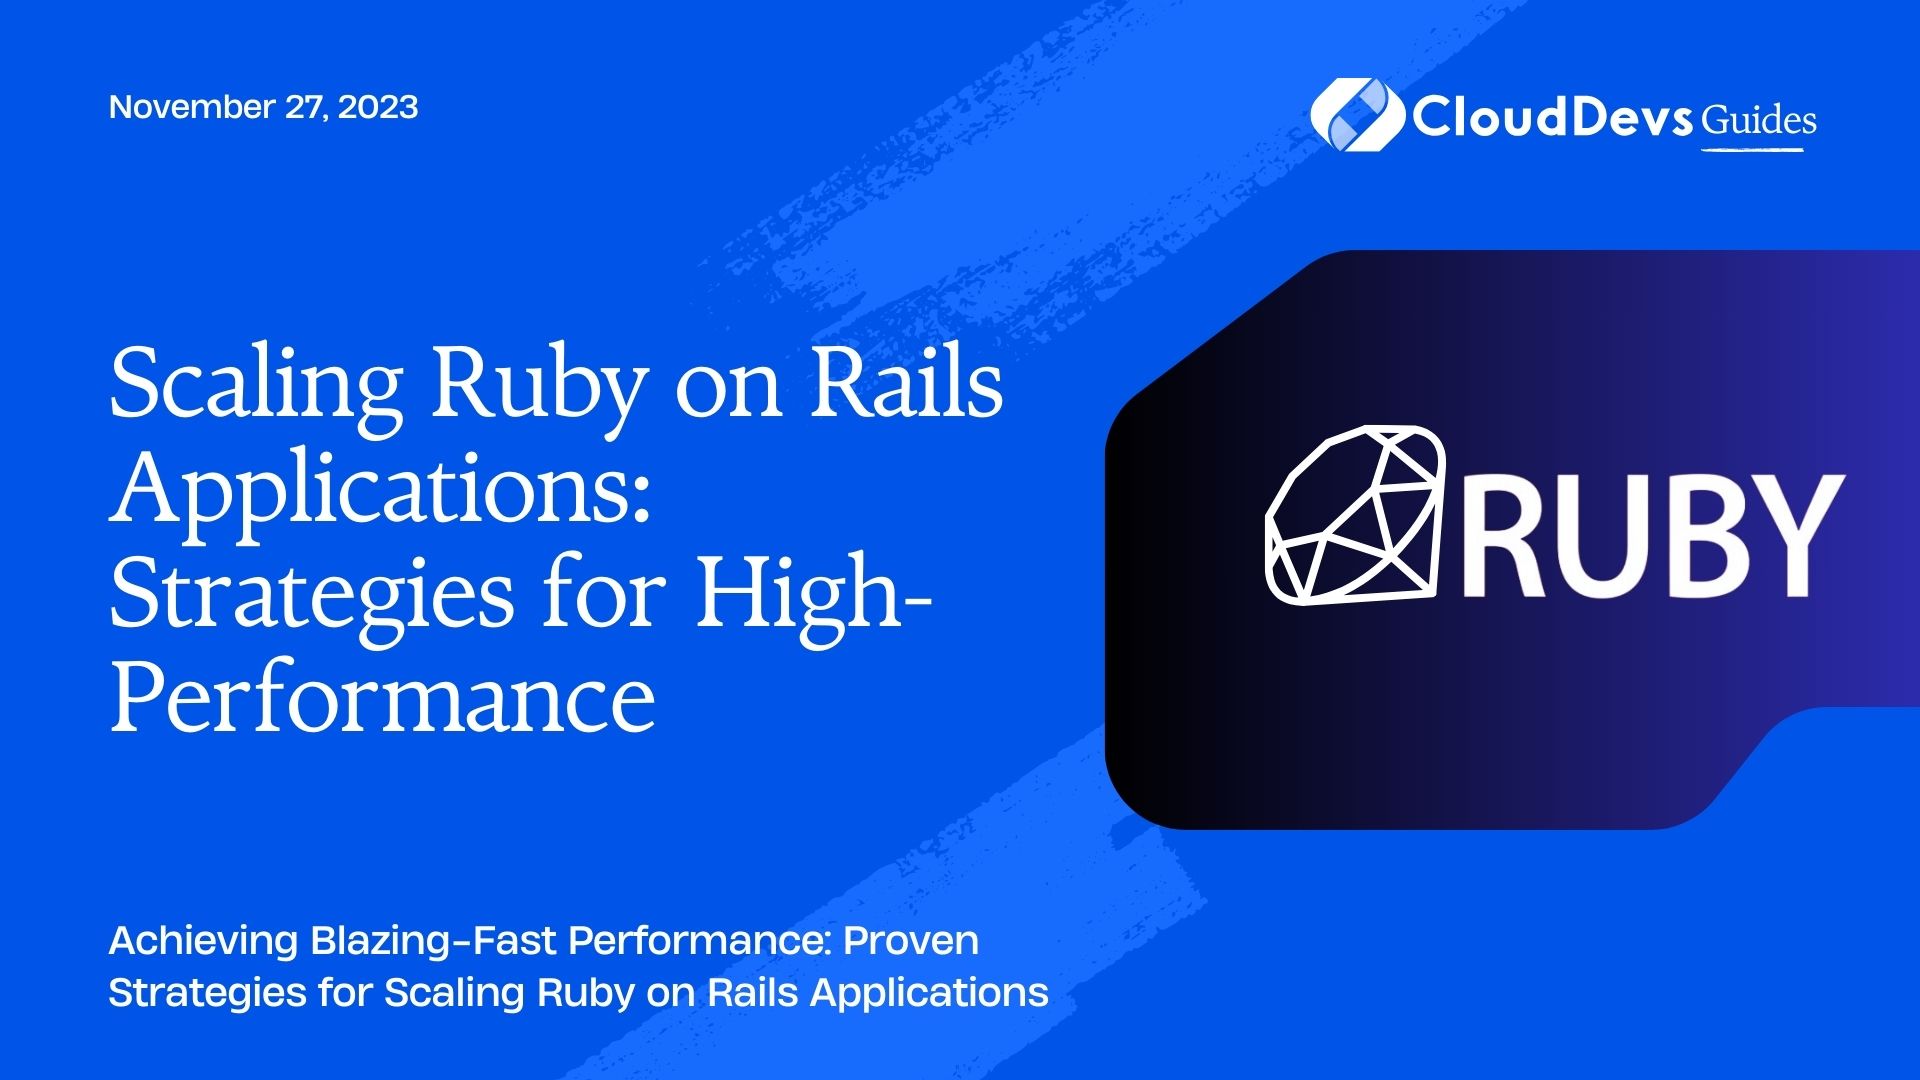 Scaling Ruby on Rails Applications: Strategies for High-Performance